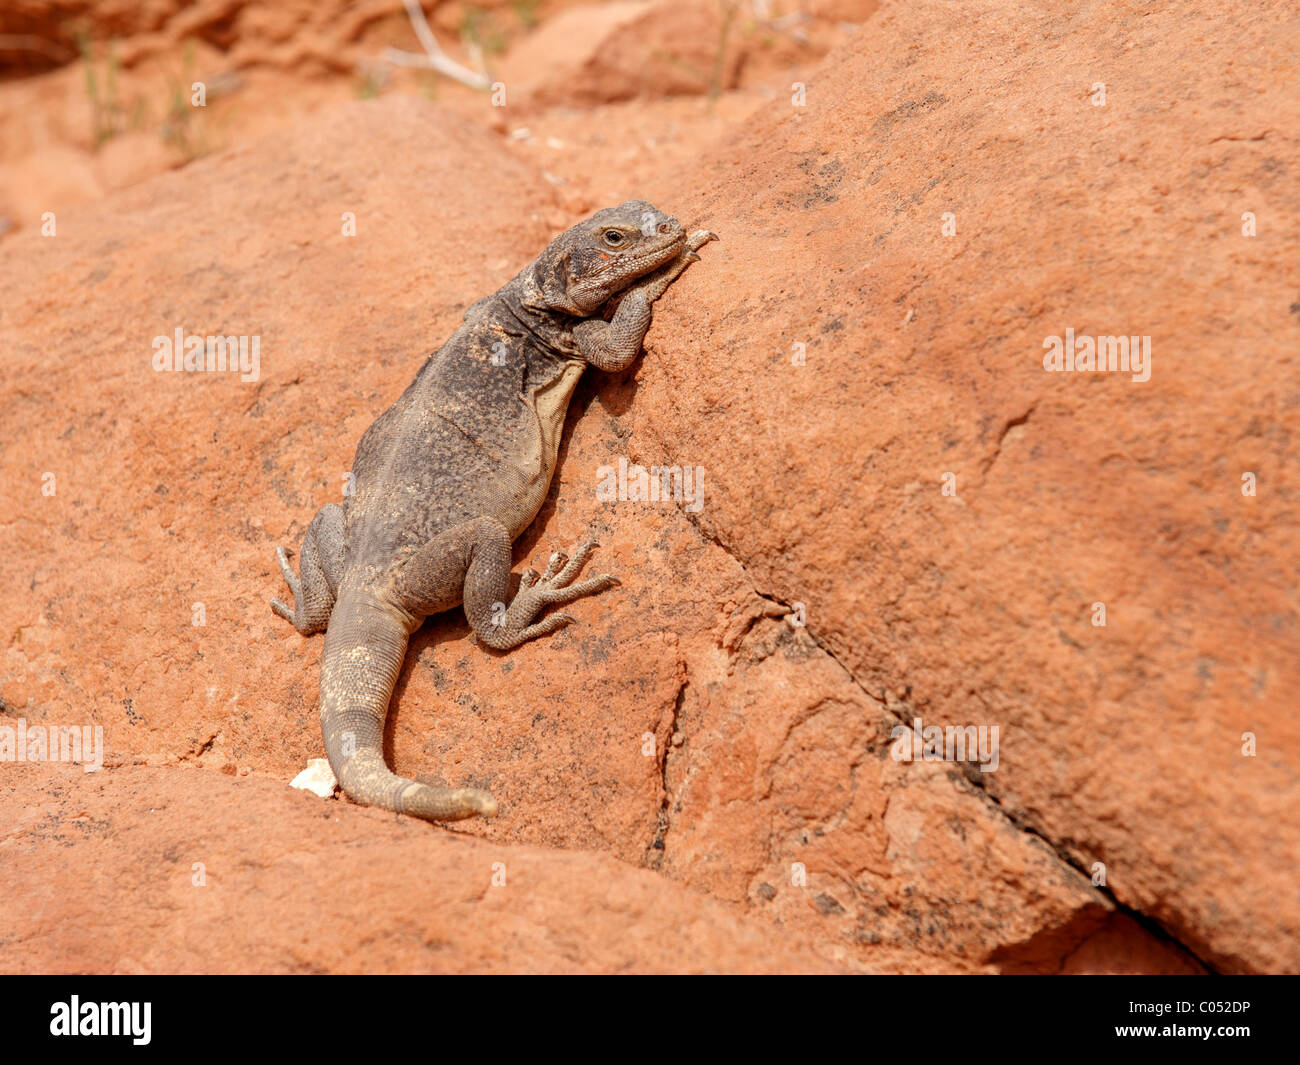 A Common Chuckwalla (Sauromalus ater), either a female or a juvenile, in Nevada's Valley of Fire State Park. Stock Photo